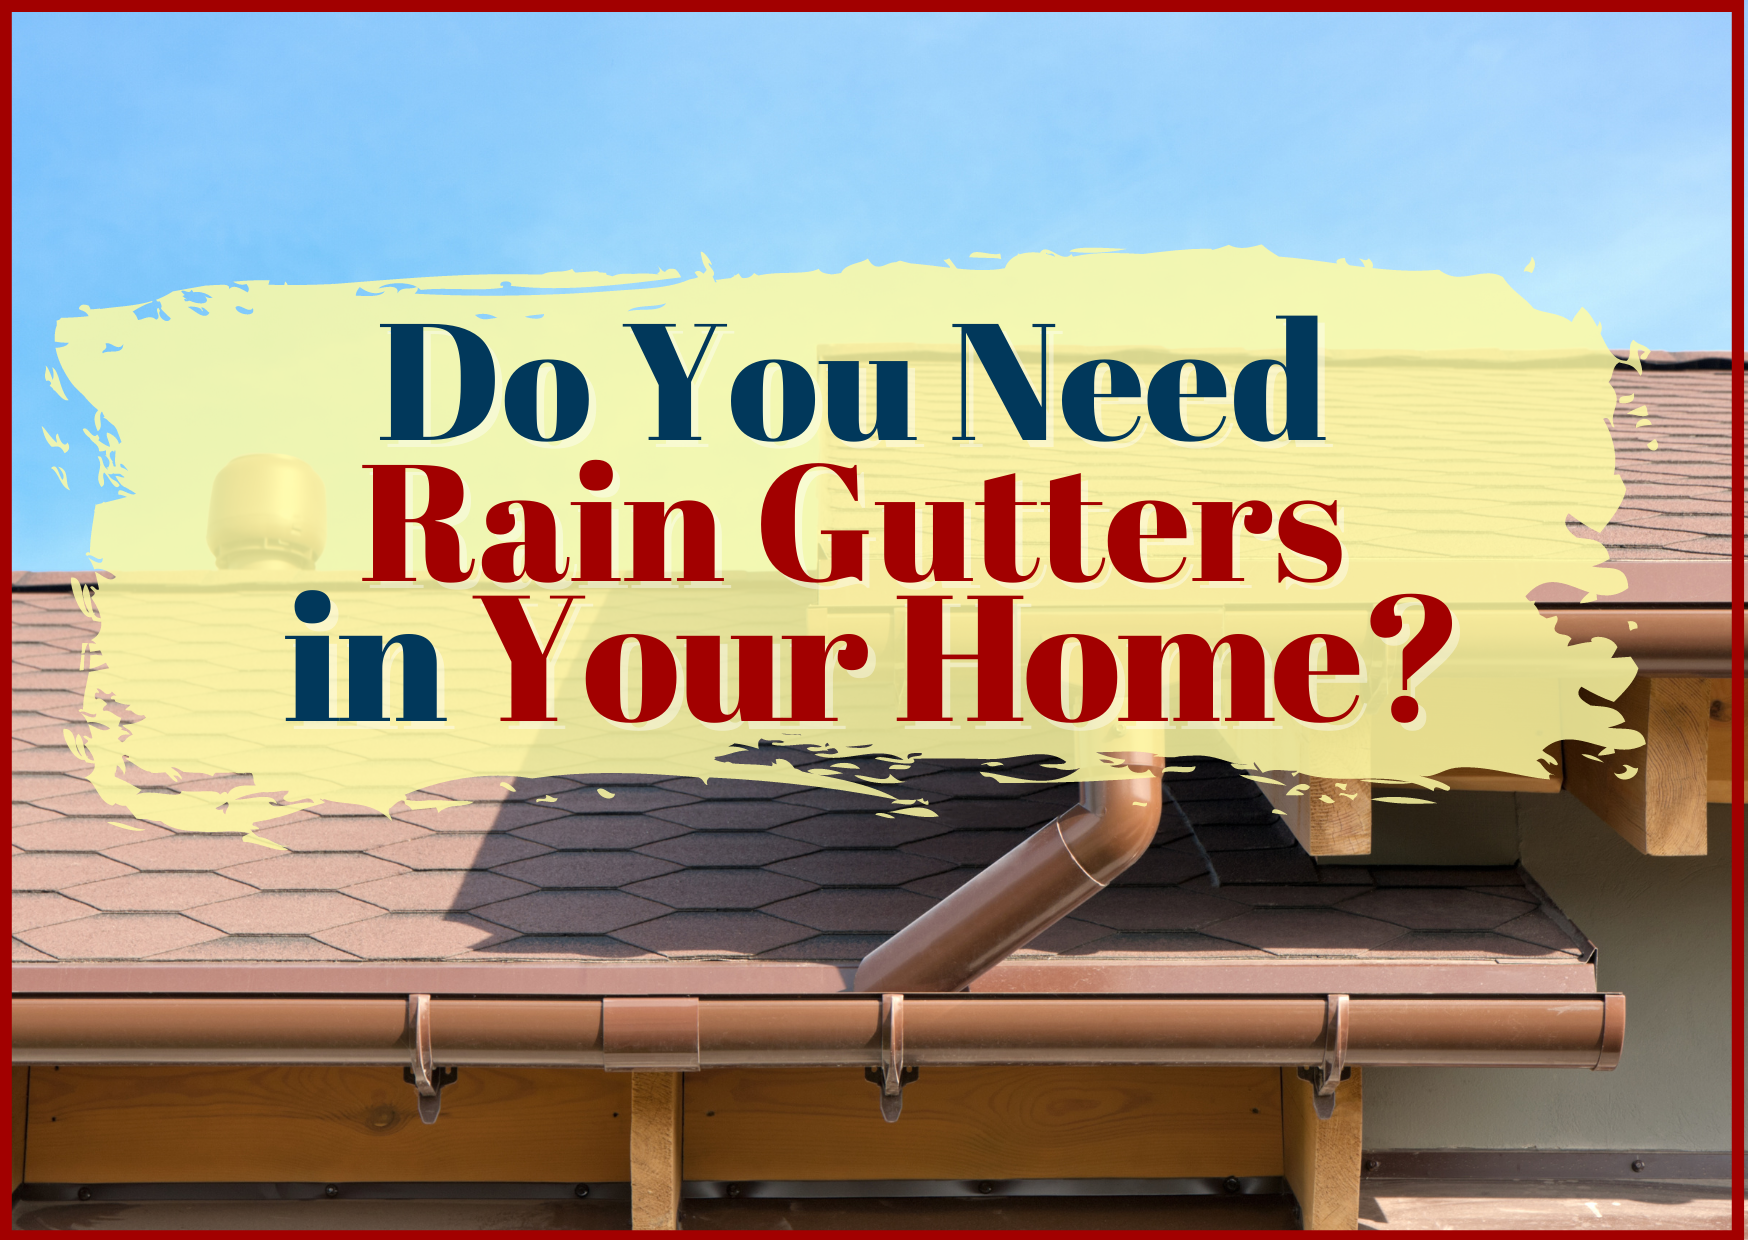 GF_Rain Gutters in Your Home - featured